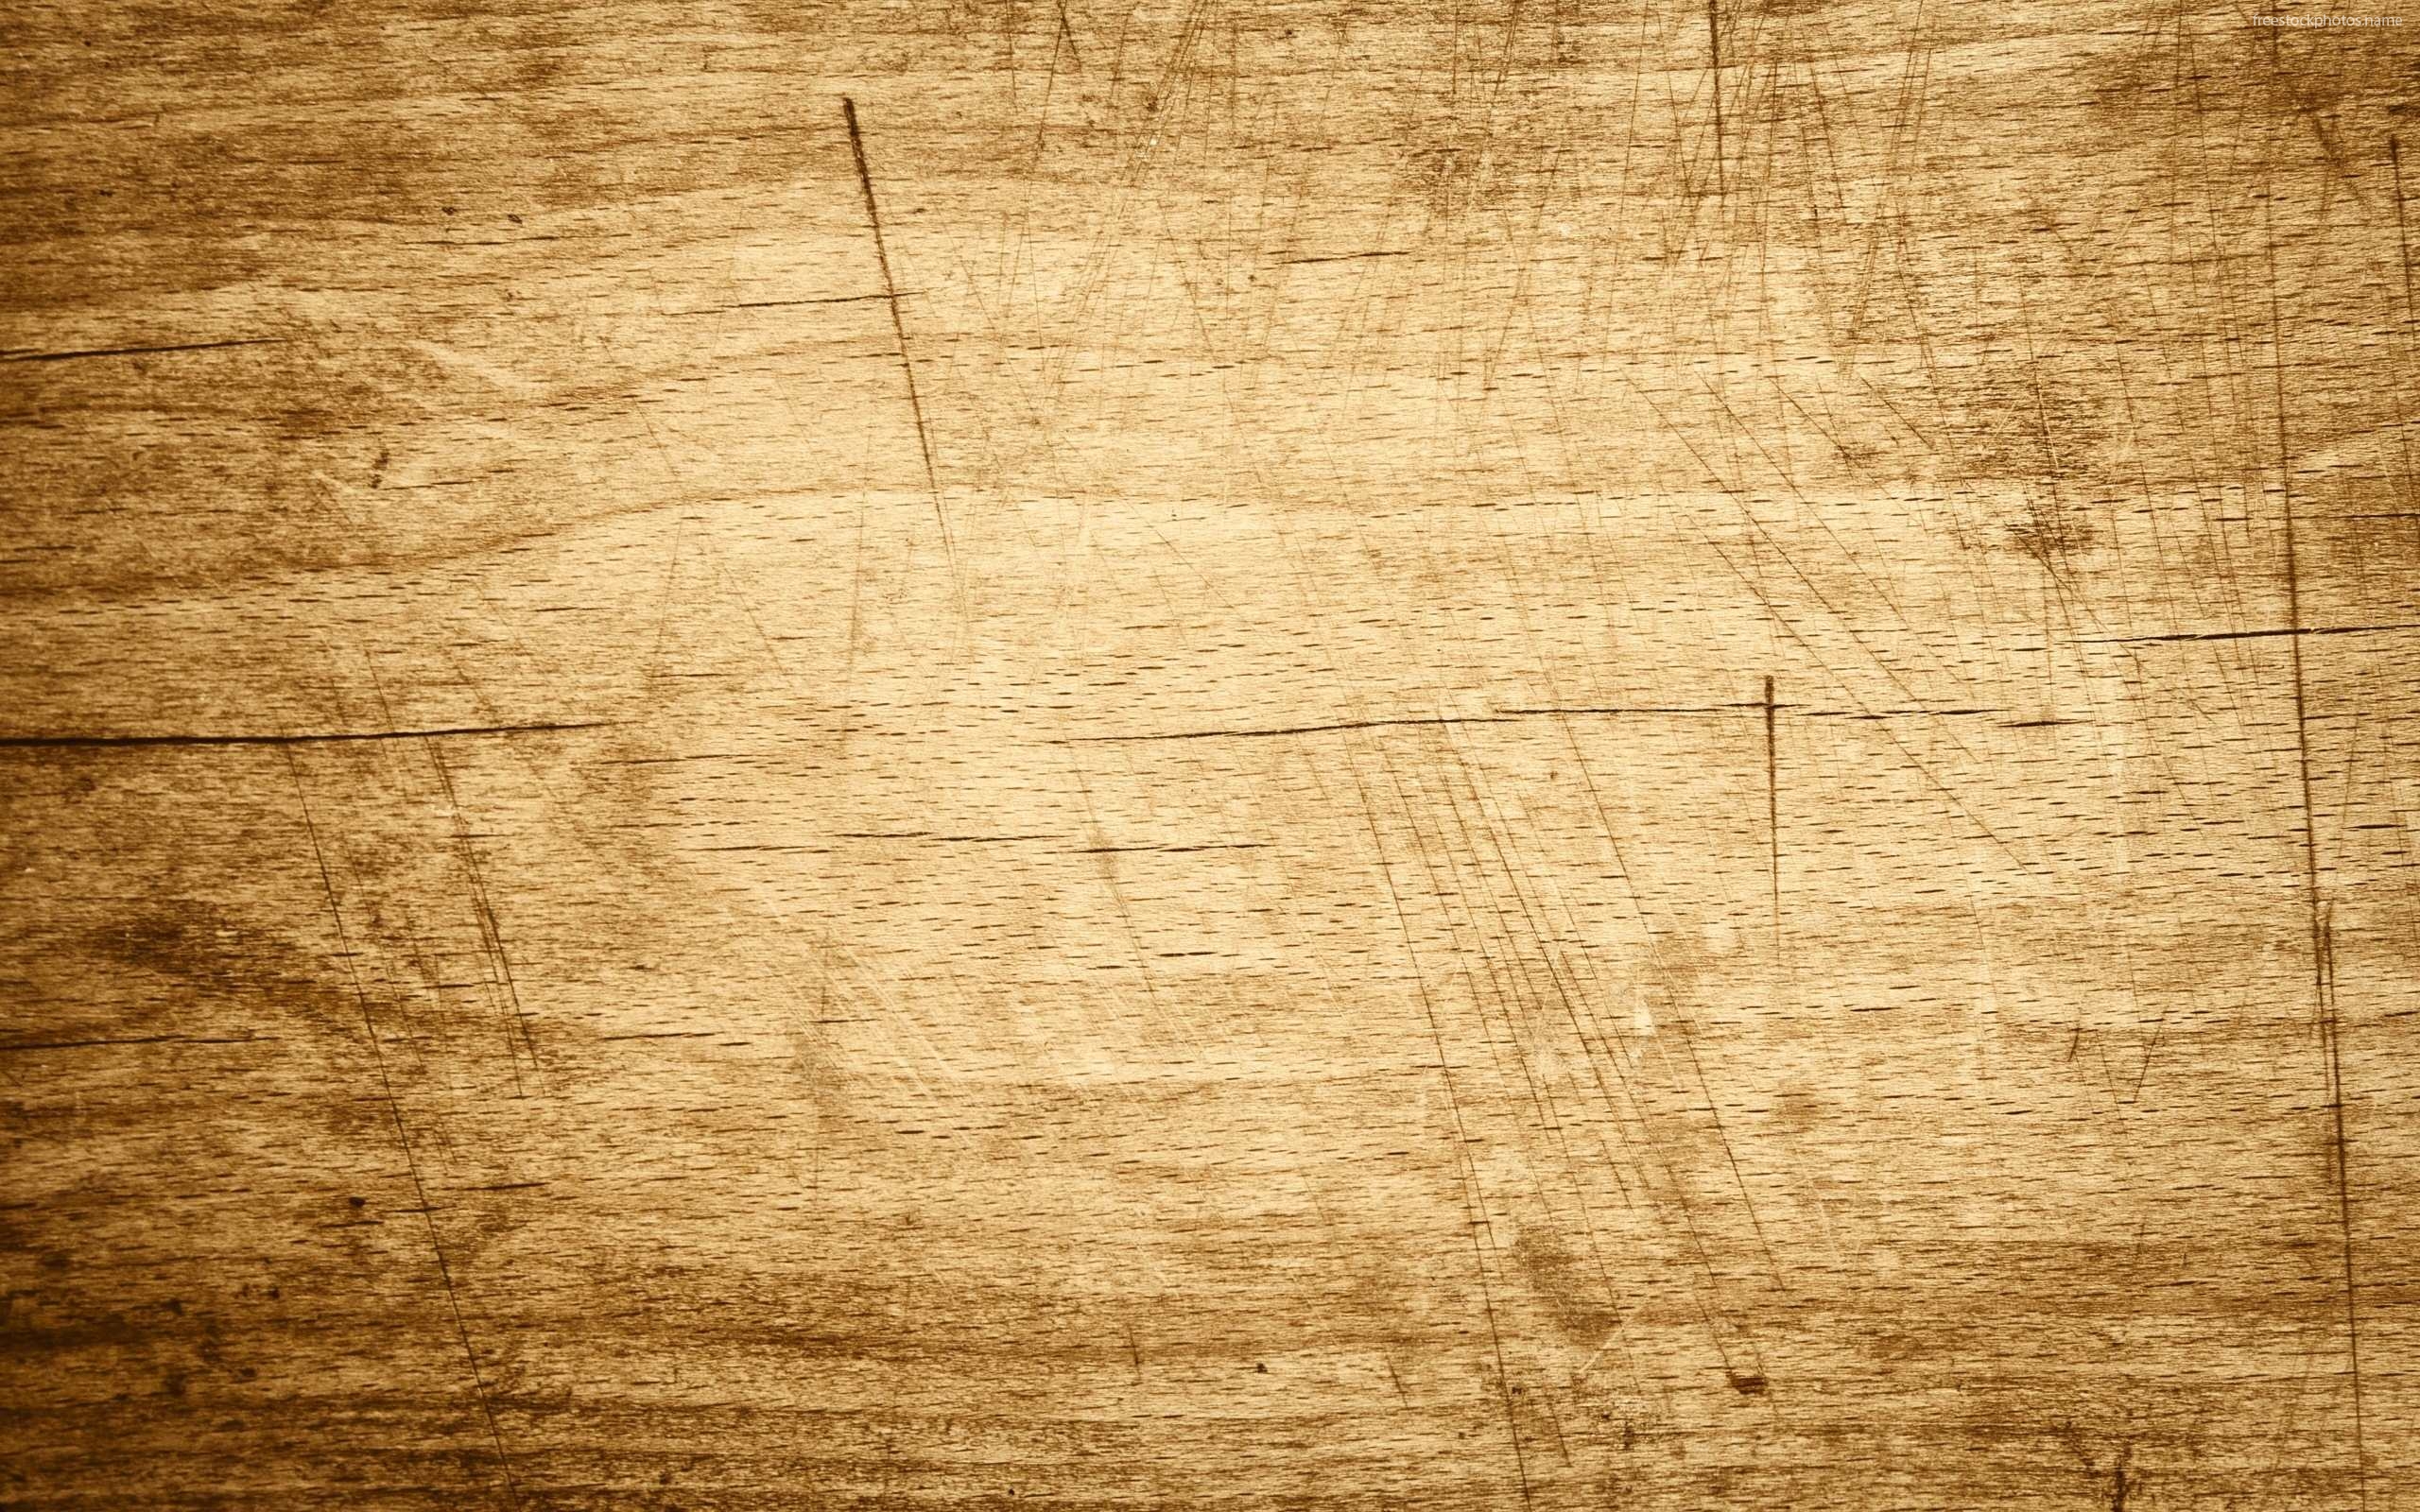 Stock Photos Of Wood Used For Background Wall Image